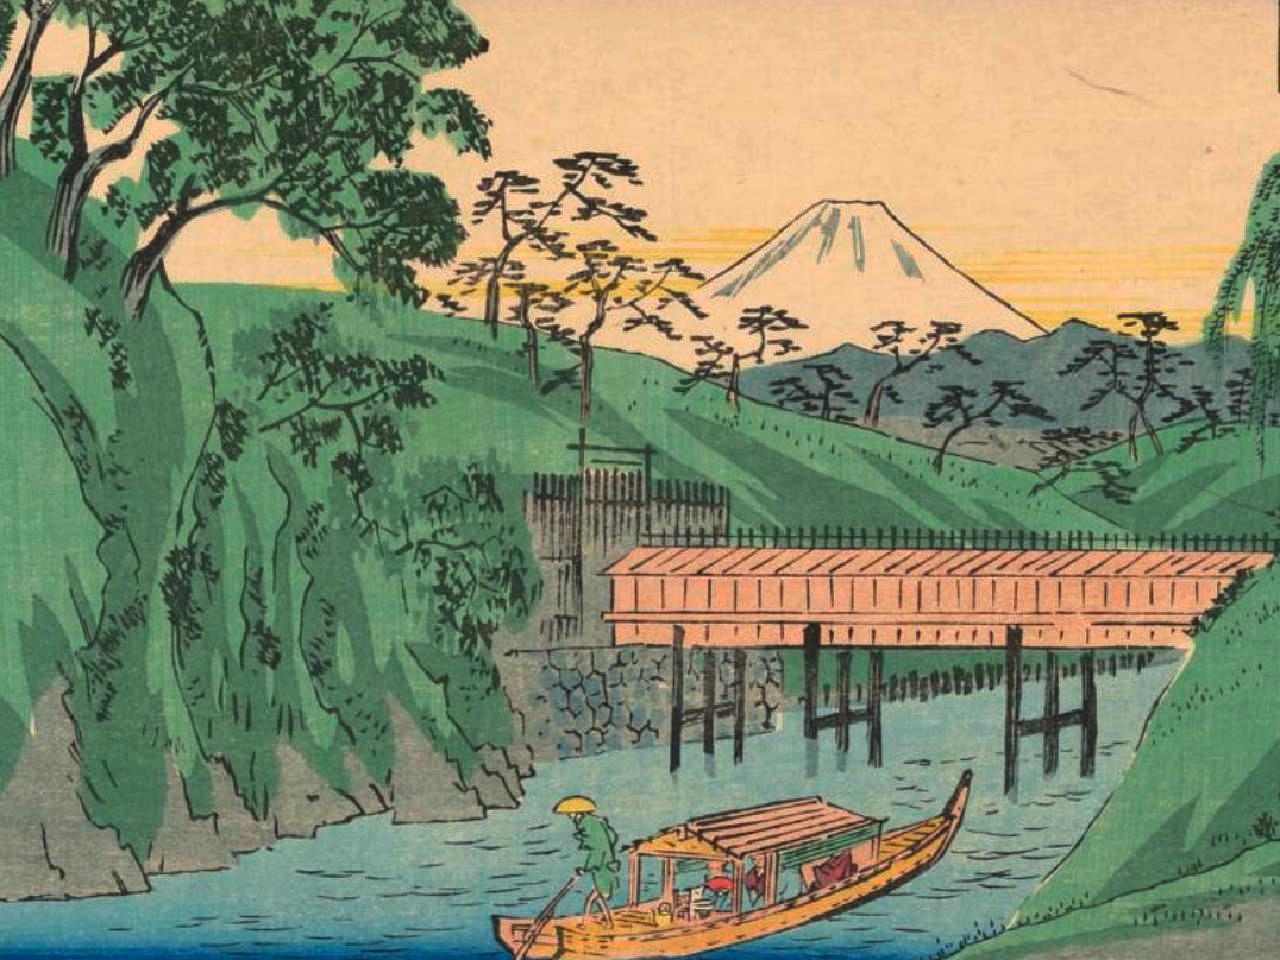 This quiet scene between a channel of water shows the famous Mt. Fuji in the background. A man in the foreground carries a group of passengers away from the auspicious mountain.